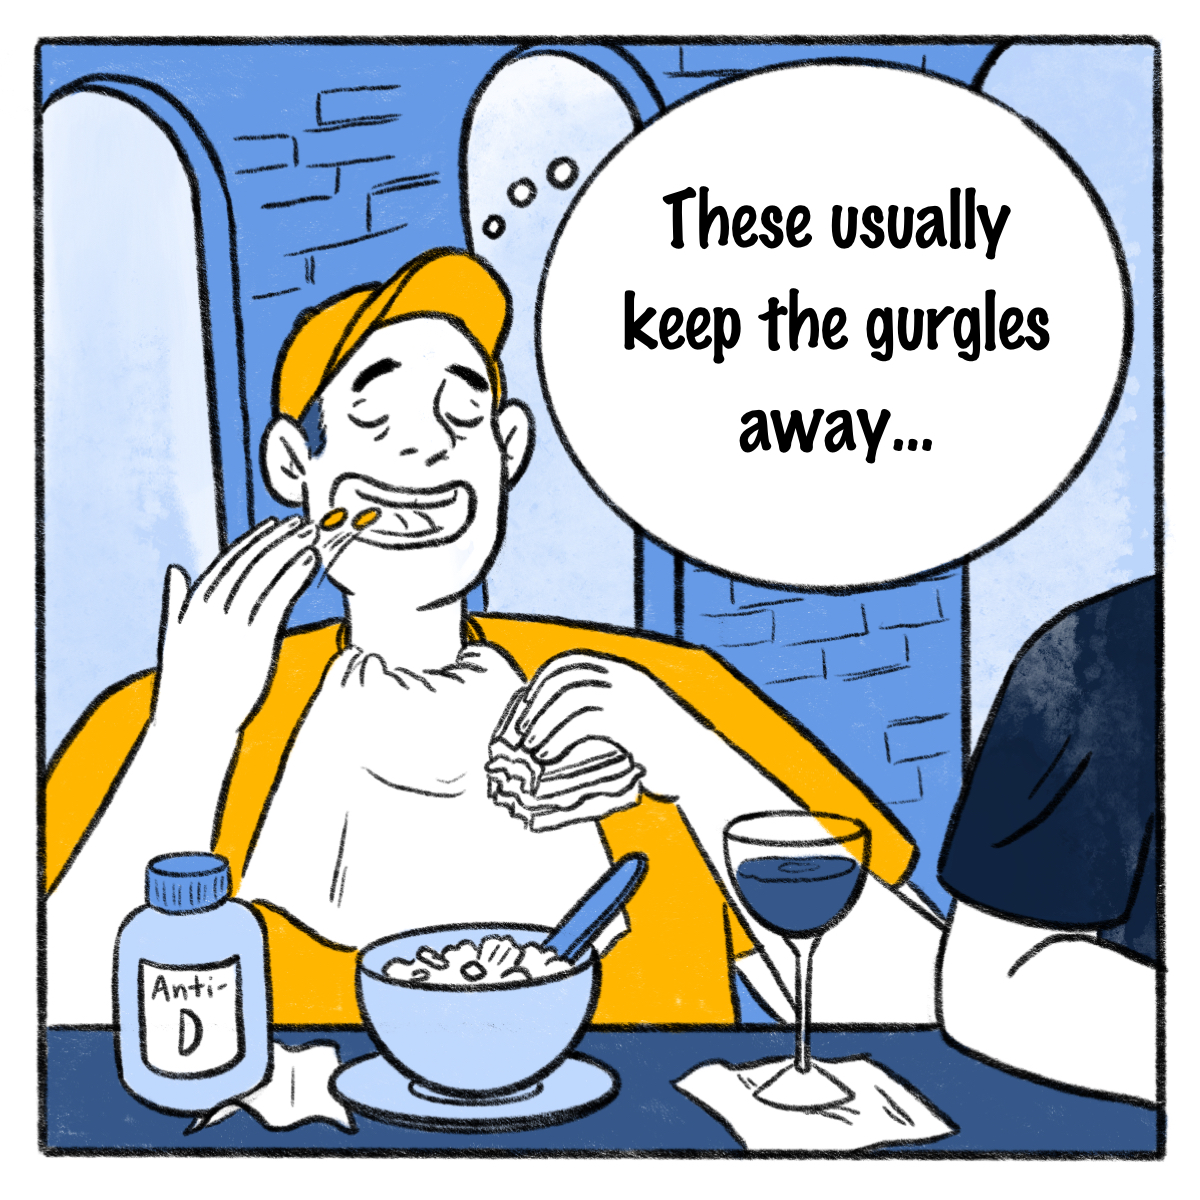 A man is eating food and taking two pills, a speech bubble says "these usually keep the gurgles away"